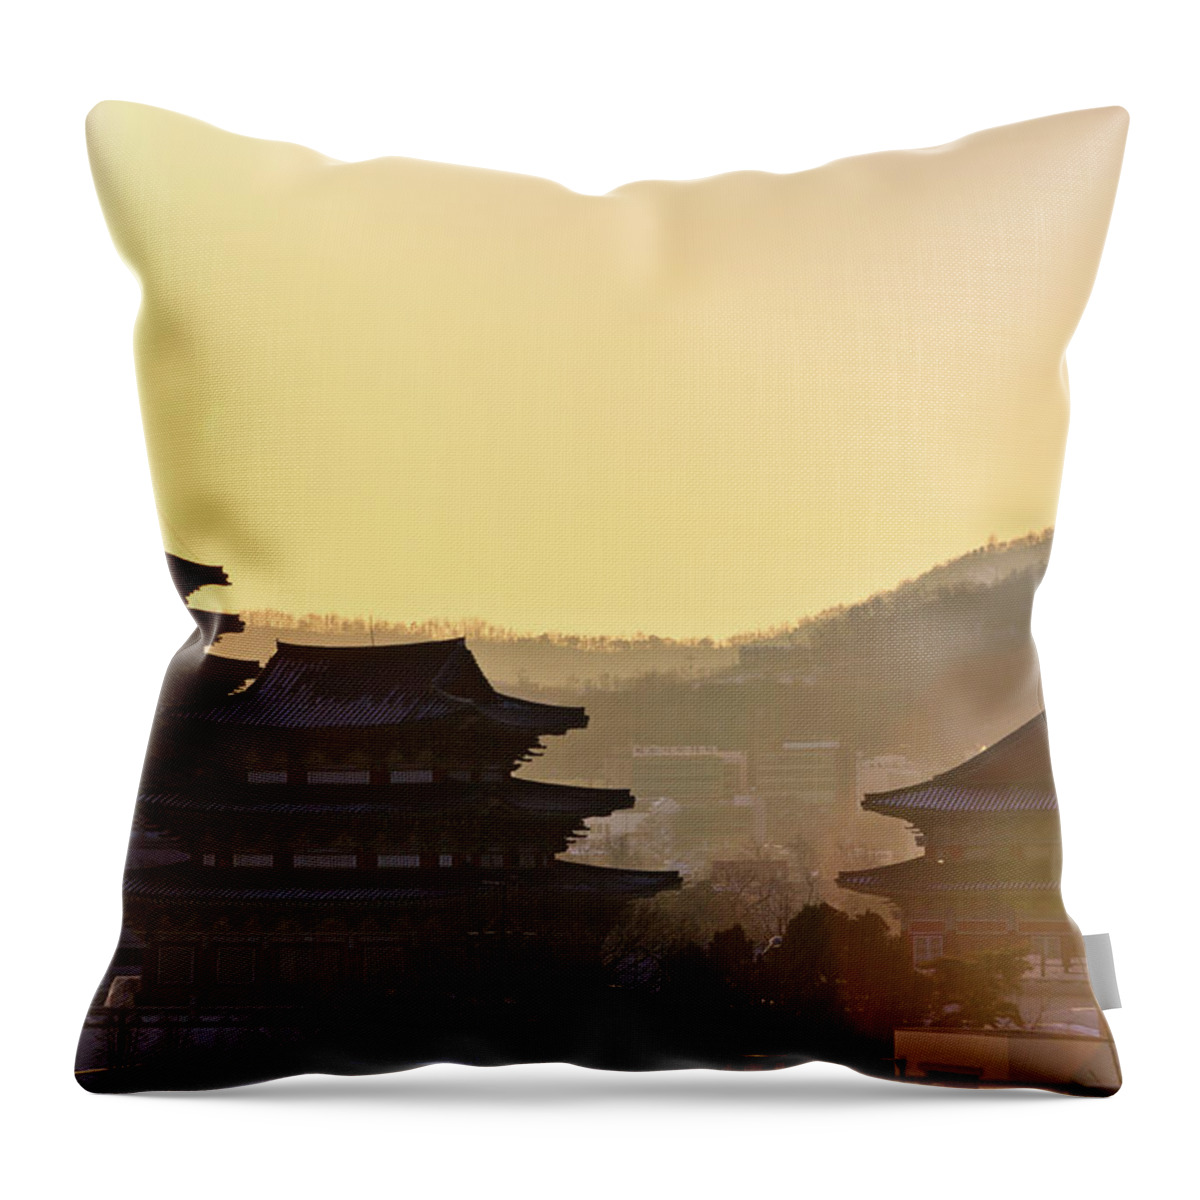 Tranquility Throw Pillow featuring the photograph Silhouette Of Palace by Sungjin Kim